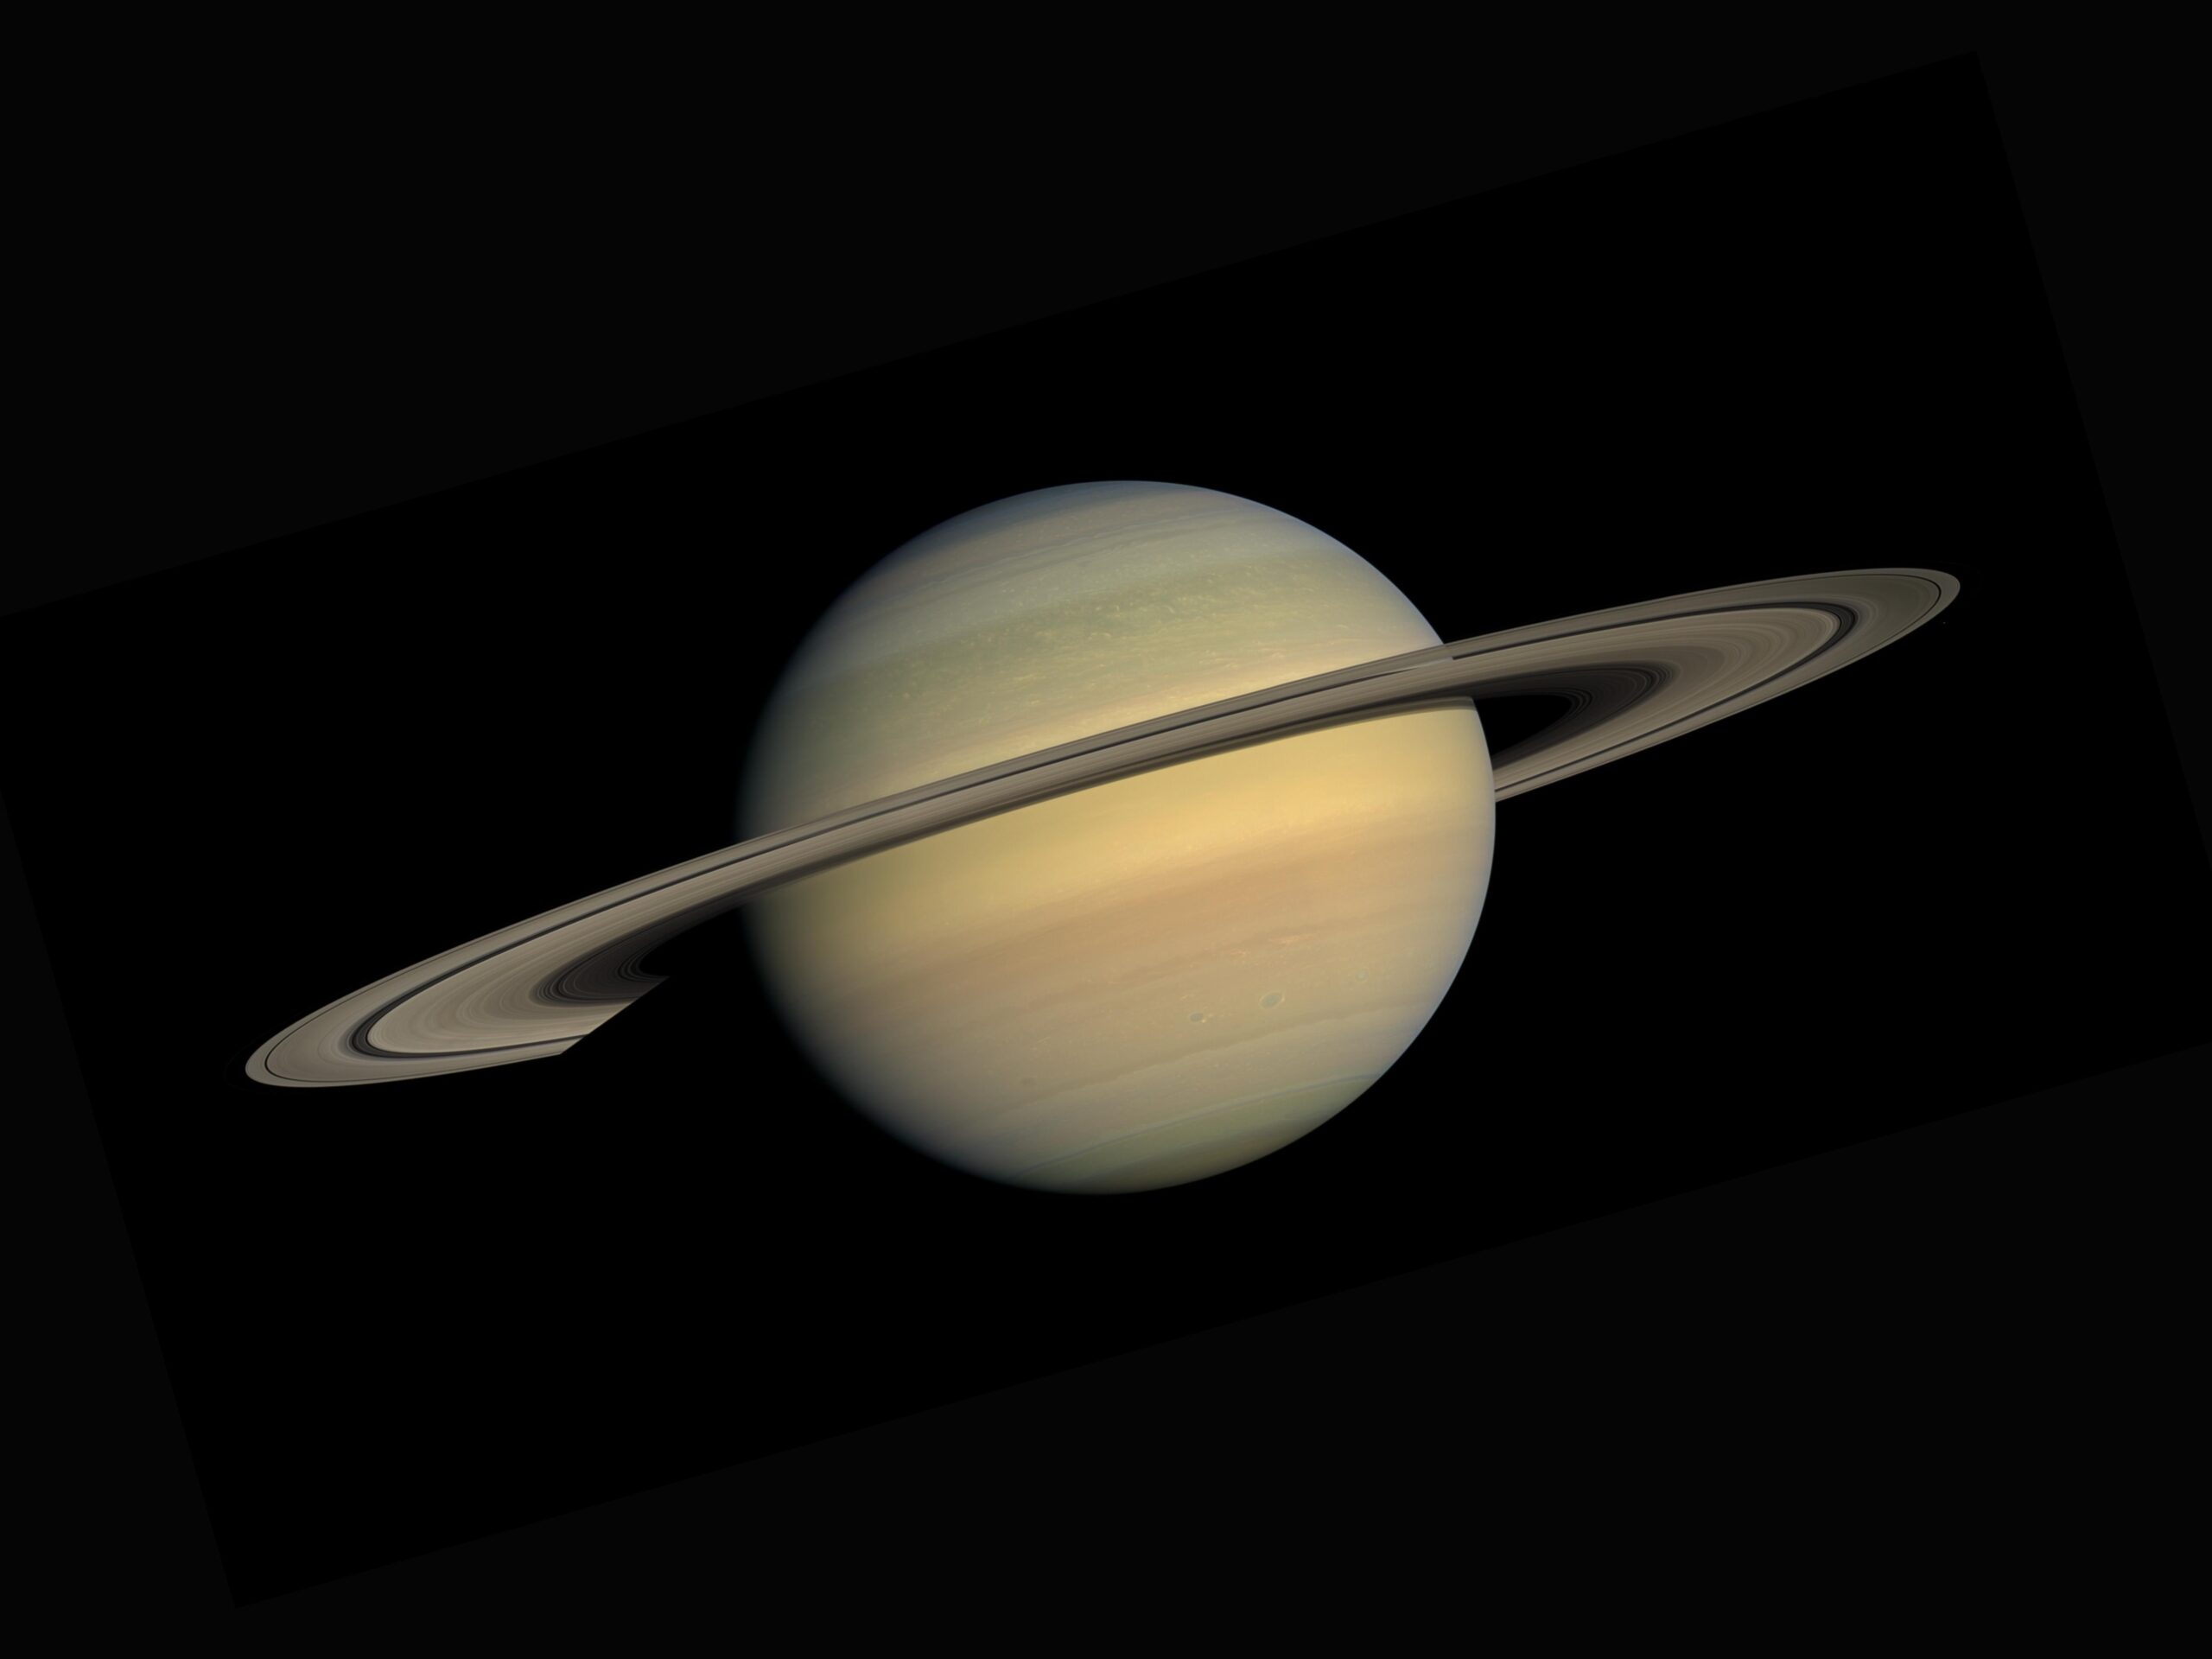 Get to Know Saturn